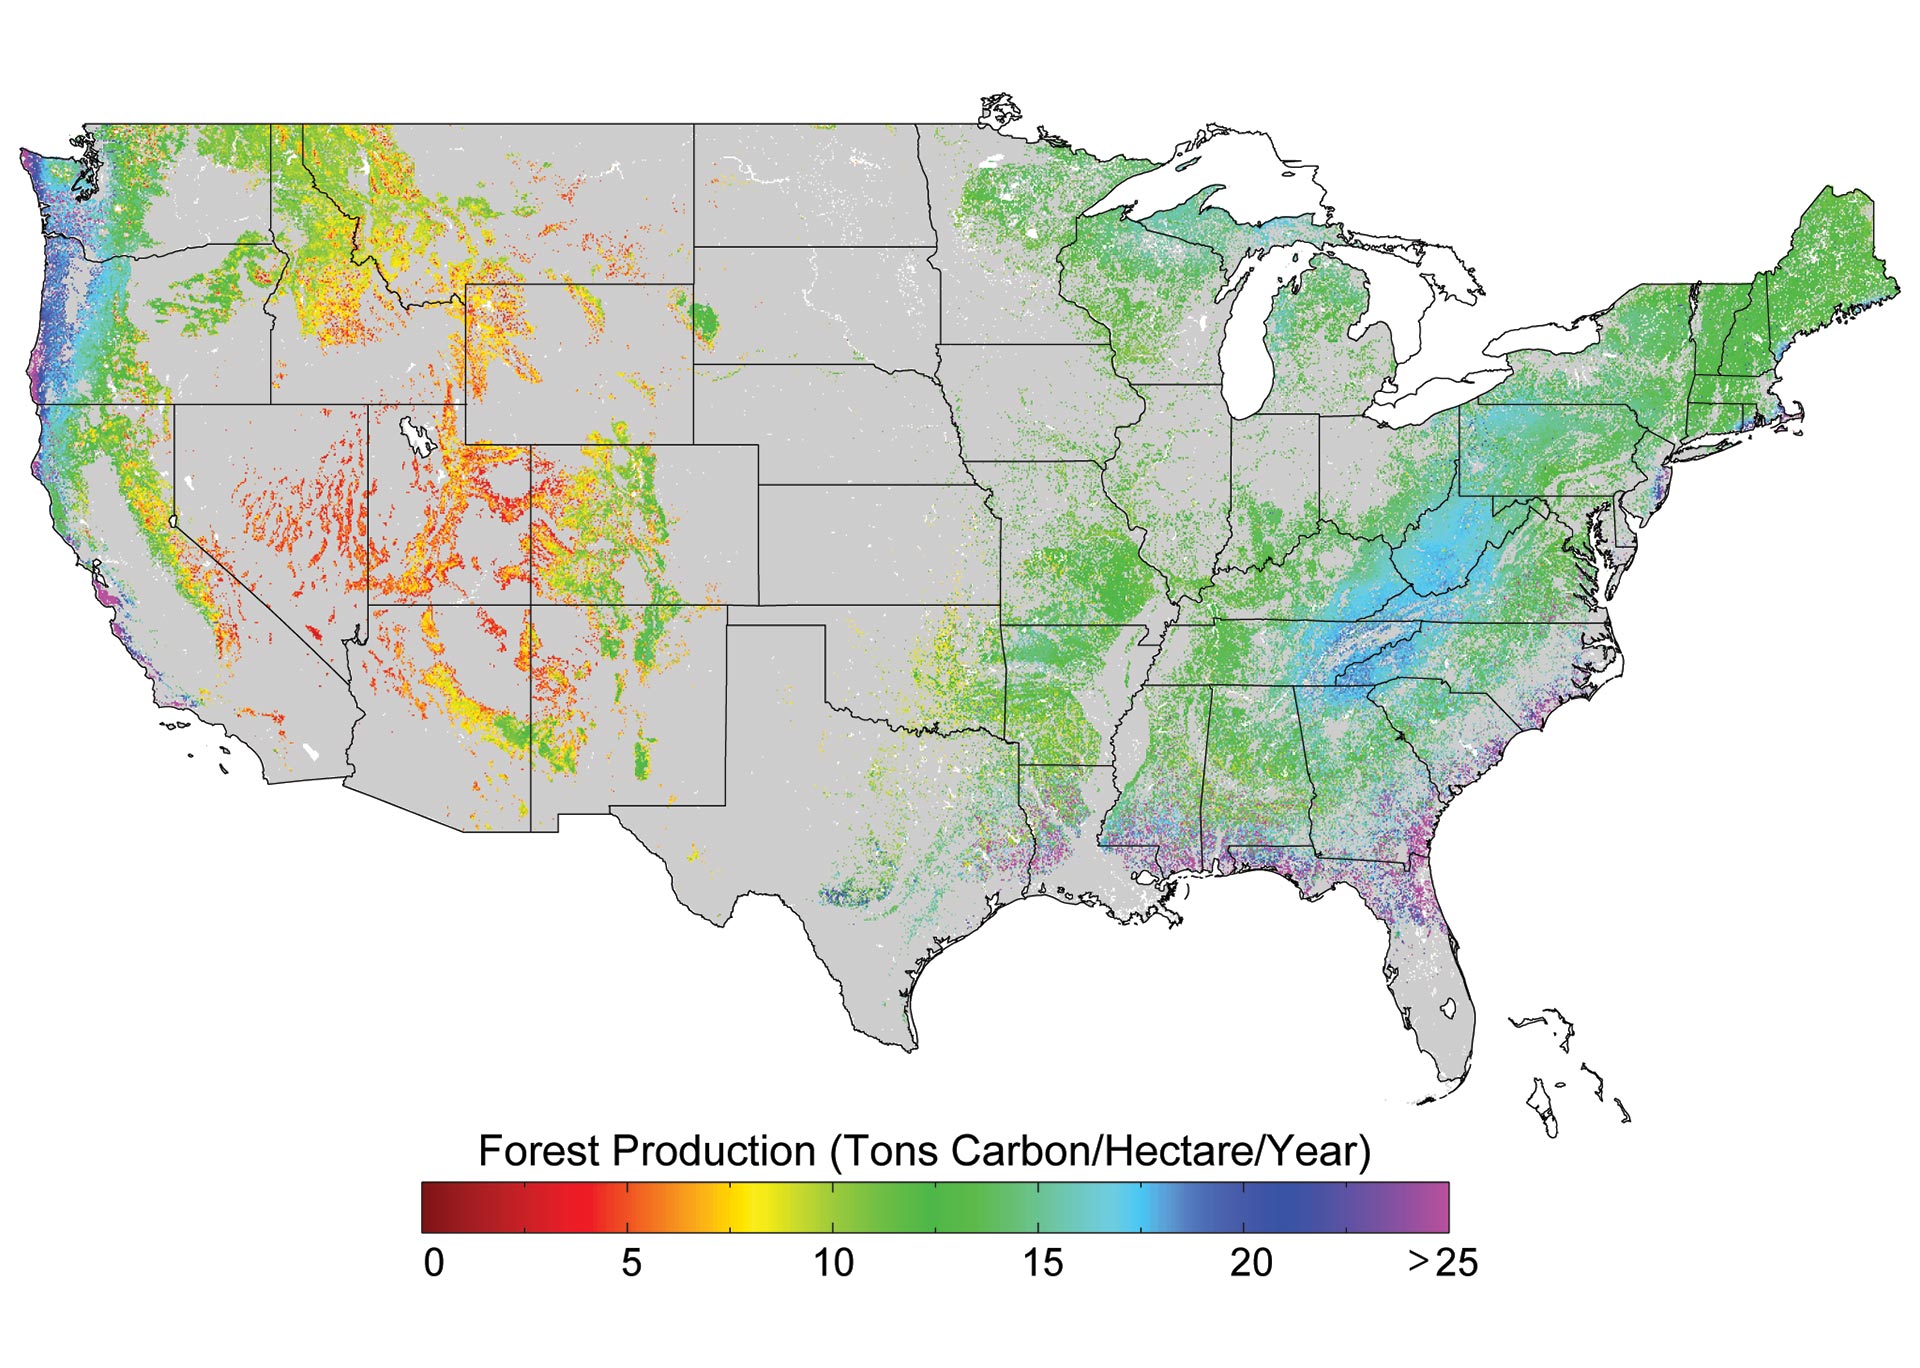 Forest Growth Provides an Important Carbon Sink